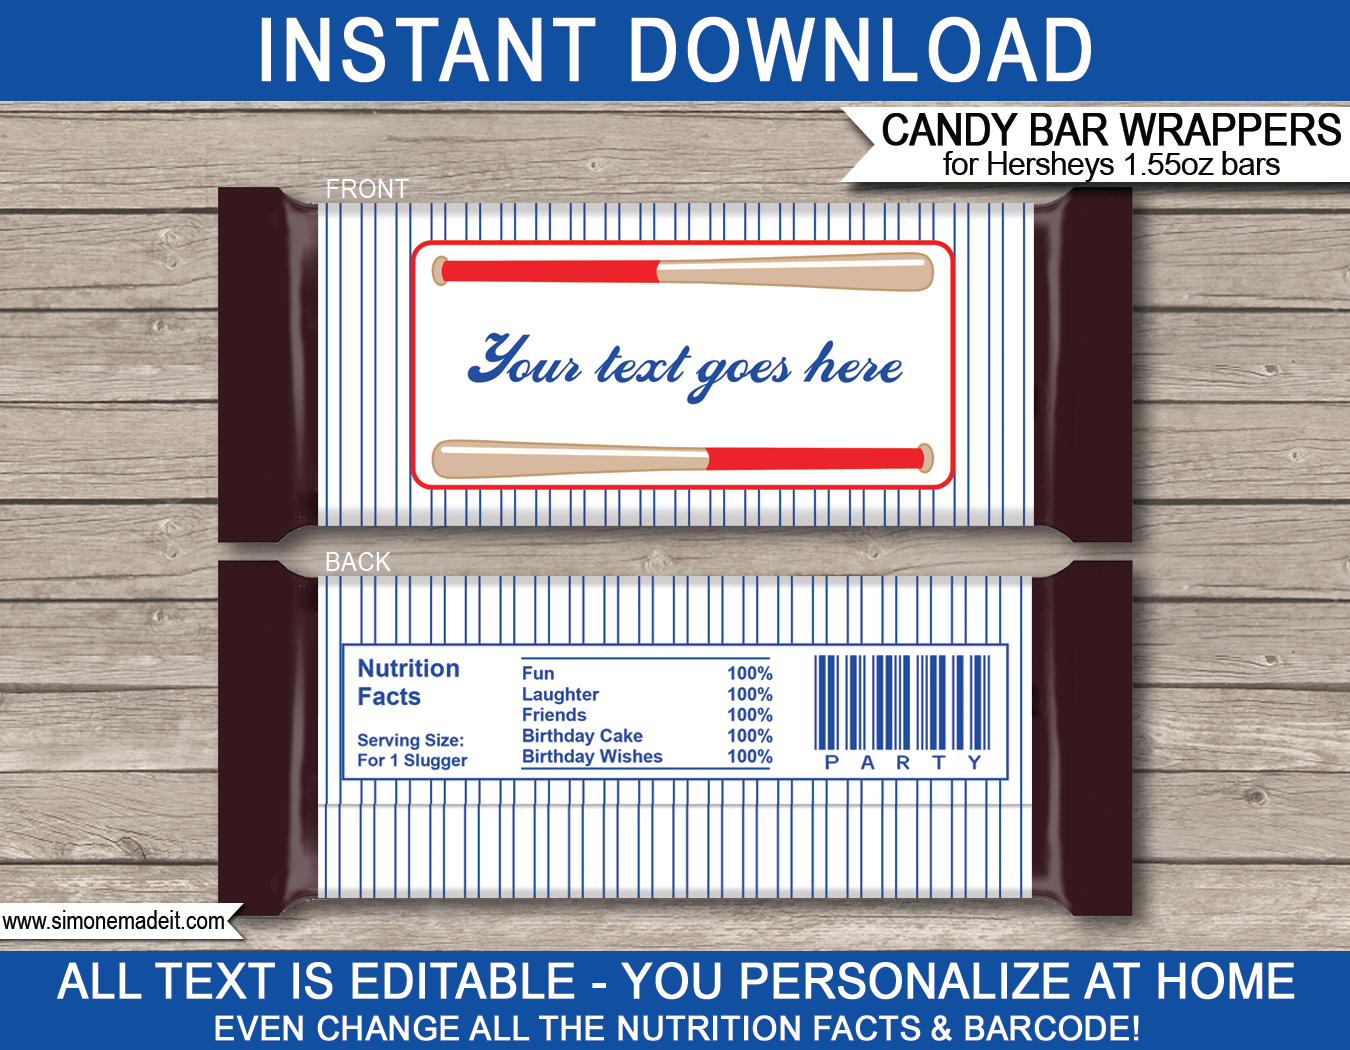 Baseball Party Hershey Candy Bar Wrappers | Birthday Party Favors | Personalized Candy Bars | Editable Template | INSTANT DOWNLOAD $3.00 via simonemadeit.com